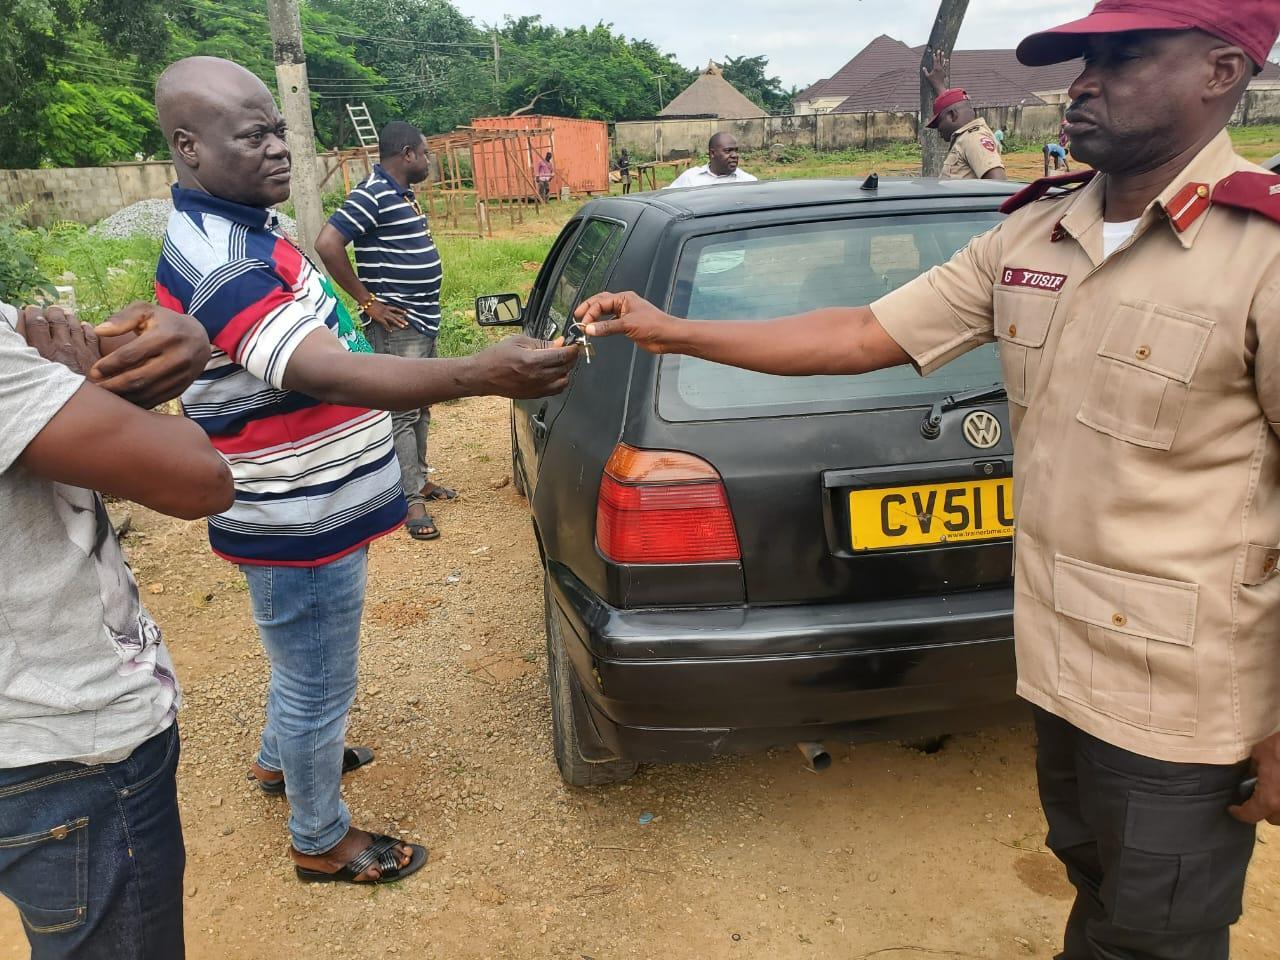 FRSC nabs man driving vehicle with Nigerian and foreign plate numbers